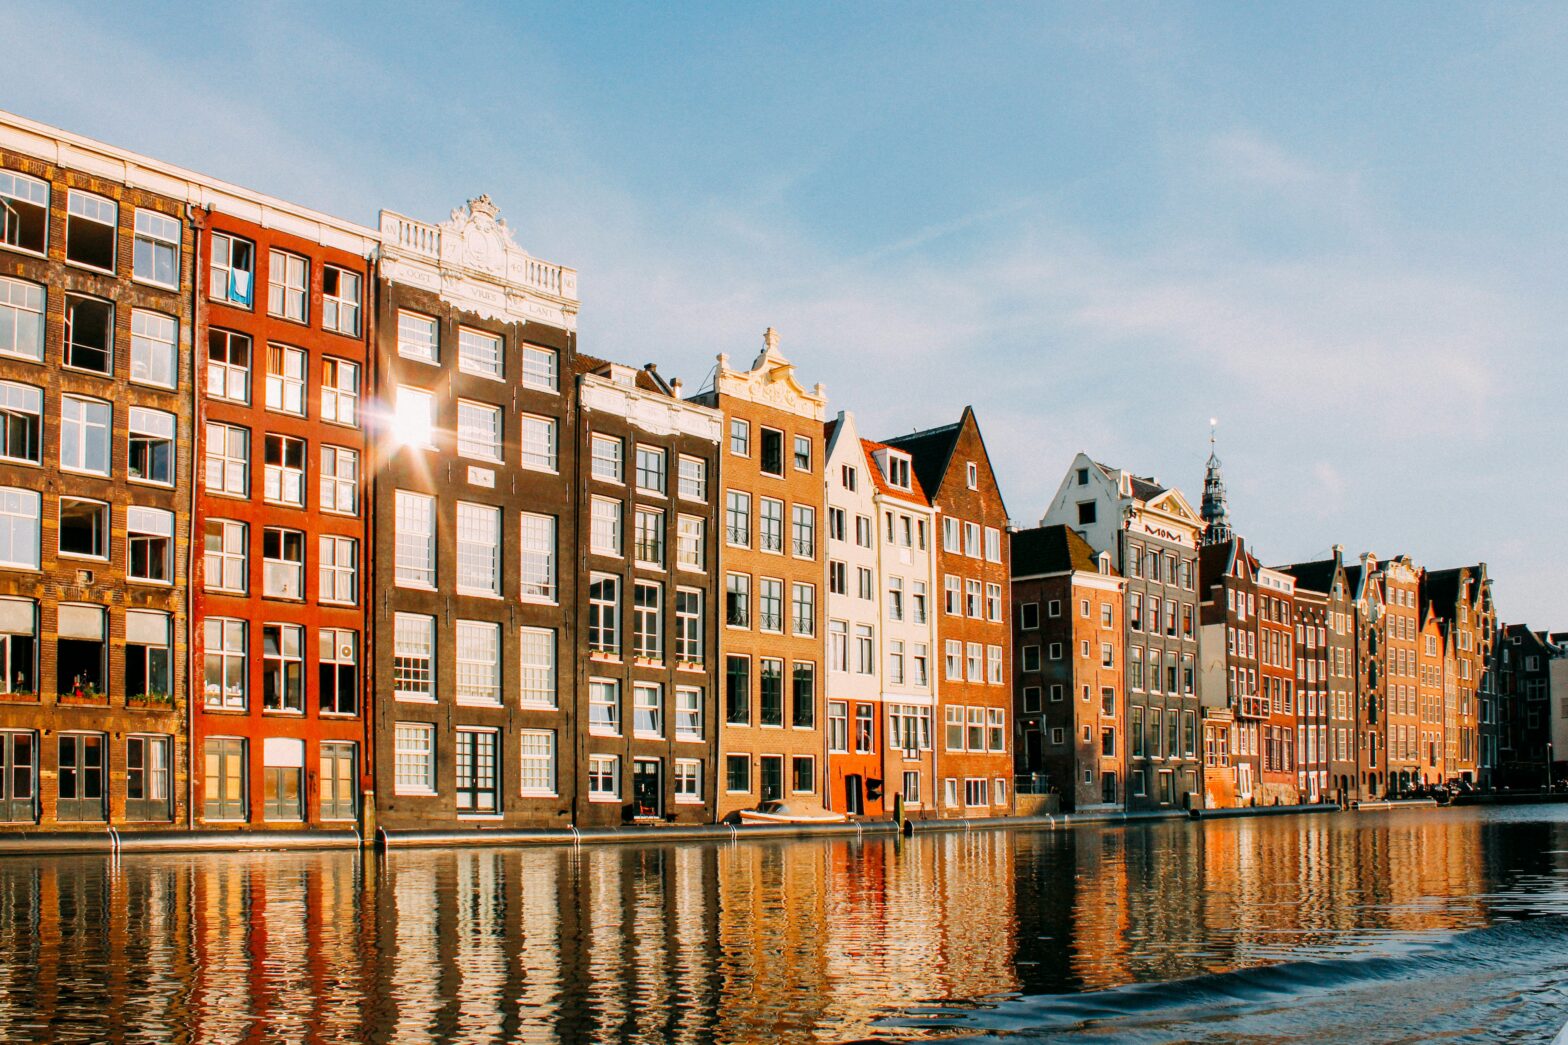 10 Things To Do In Amsterdam For $20 Or Less